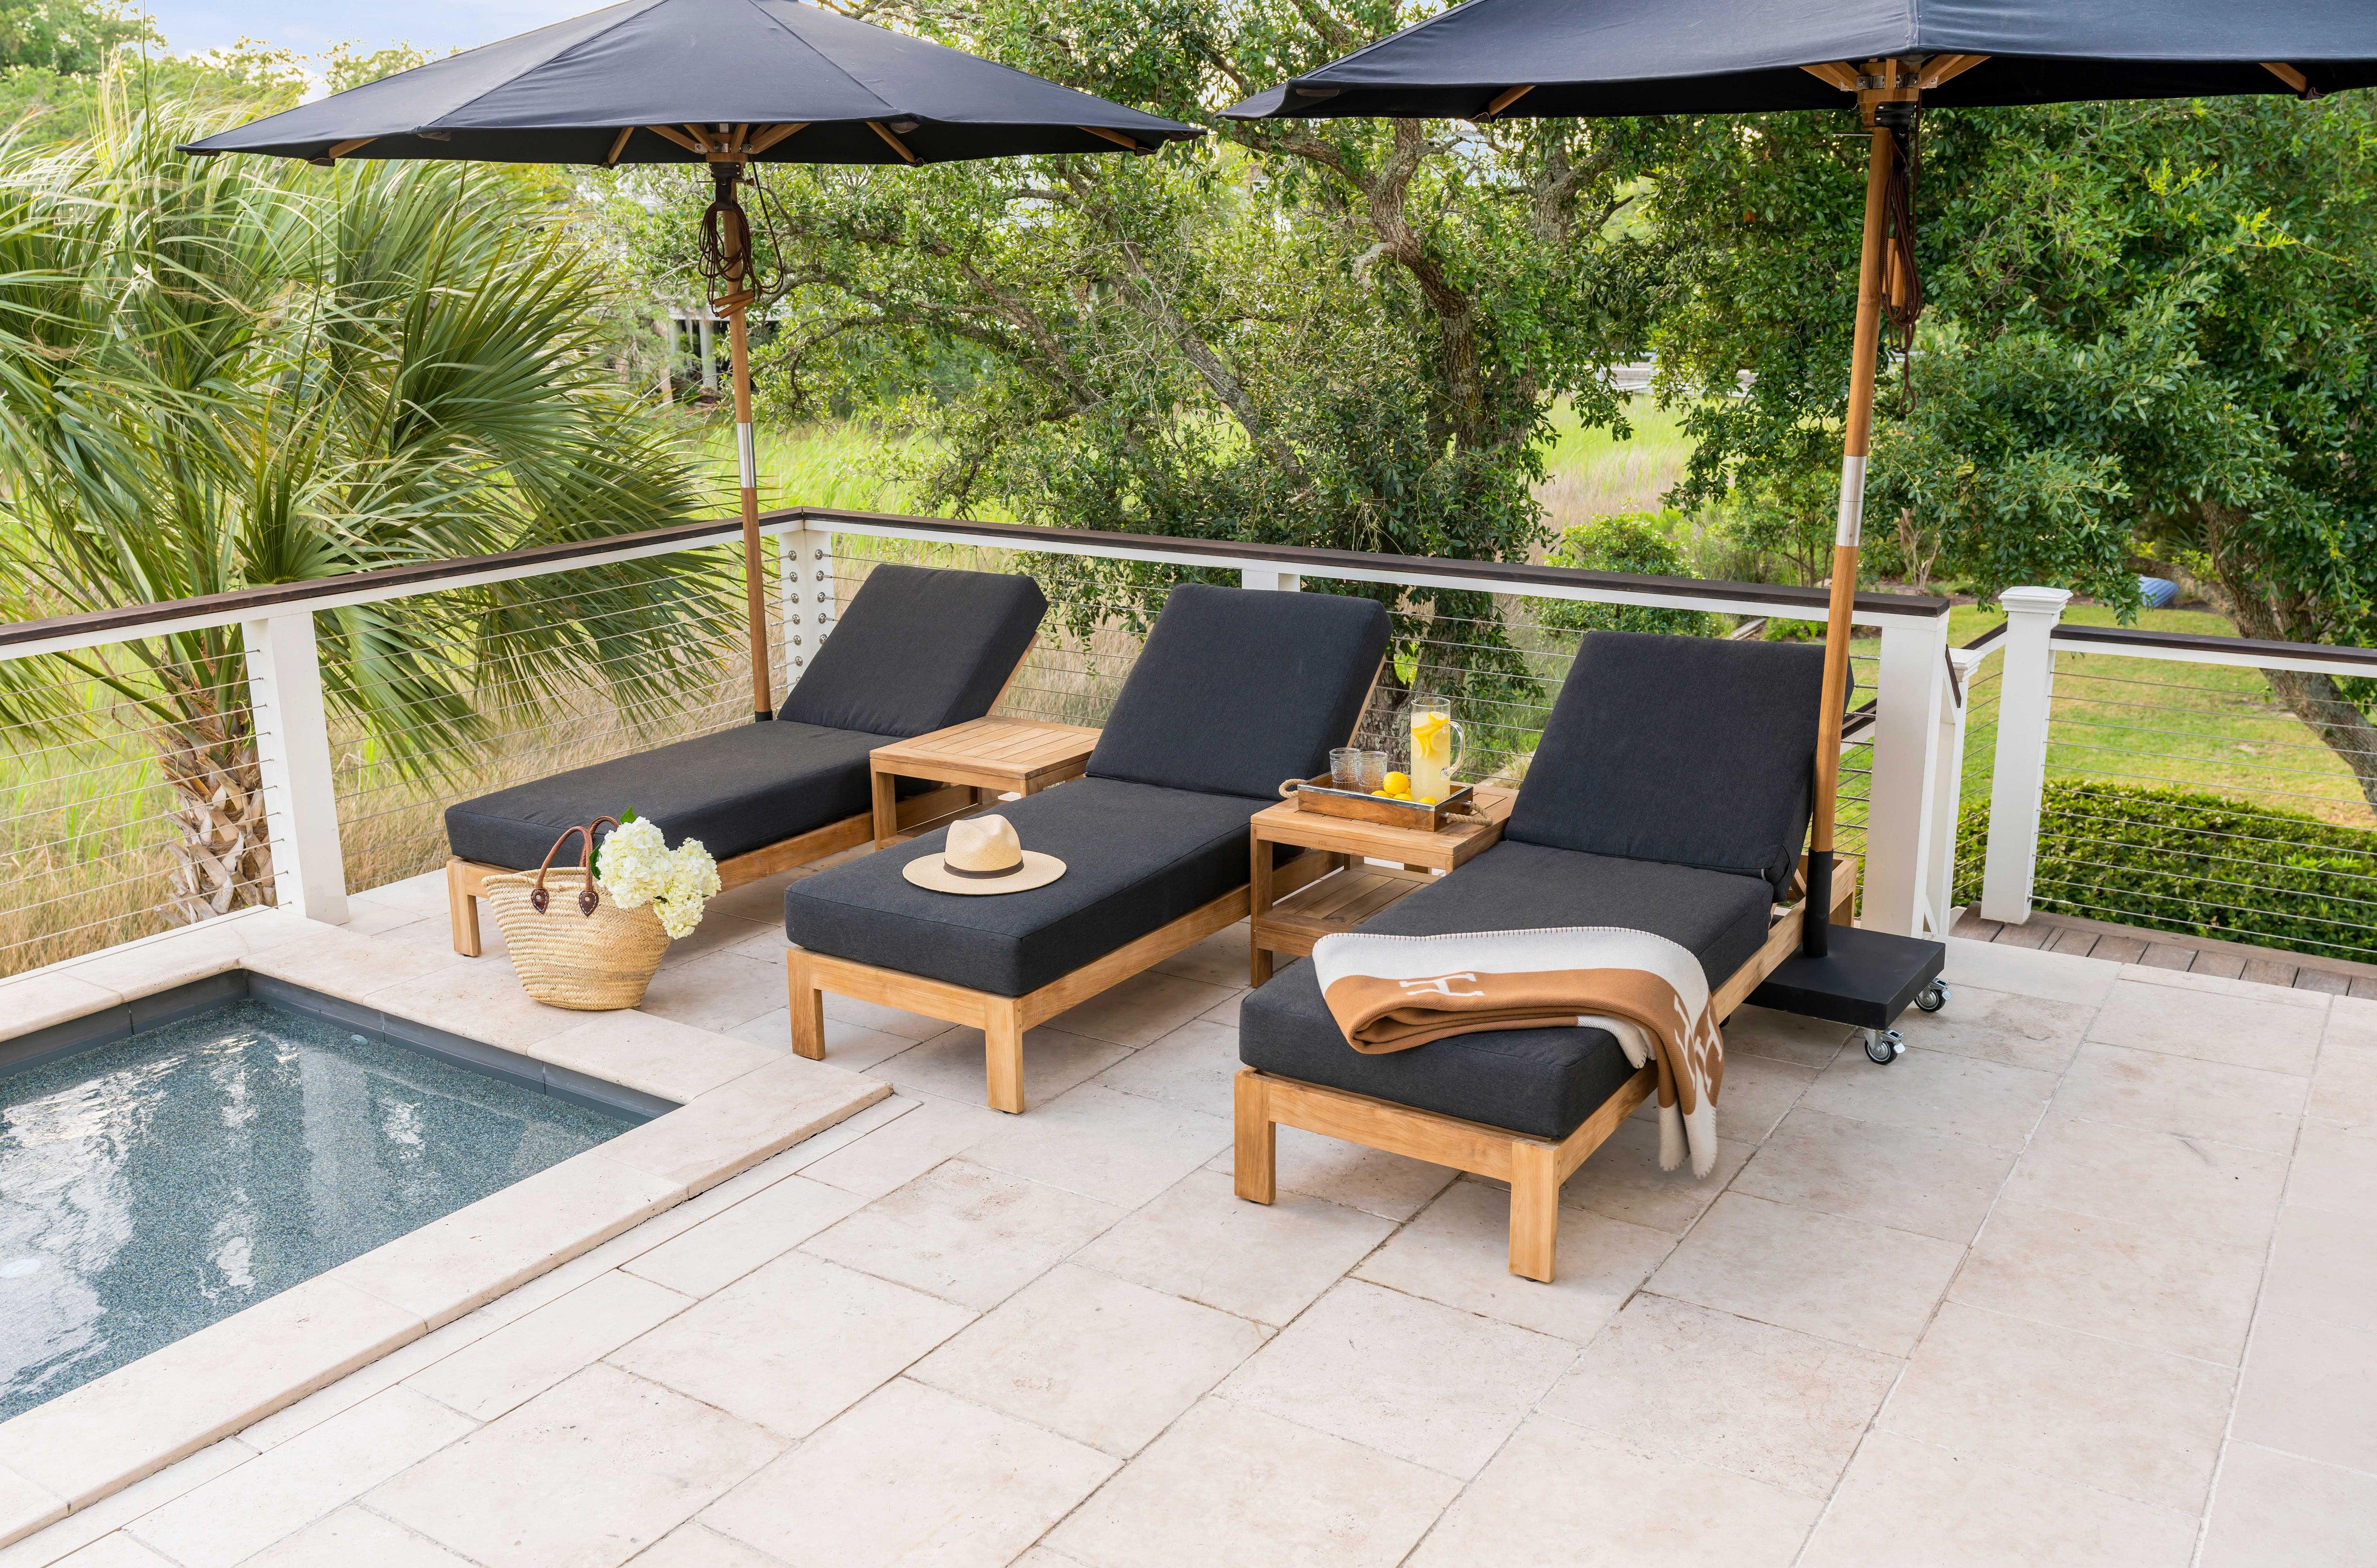 Highest Quality Teak Outdoor Chaise Lounge Chairs With Sunbrella Cushions